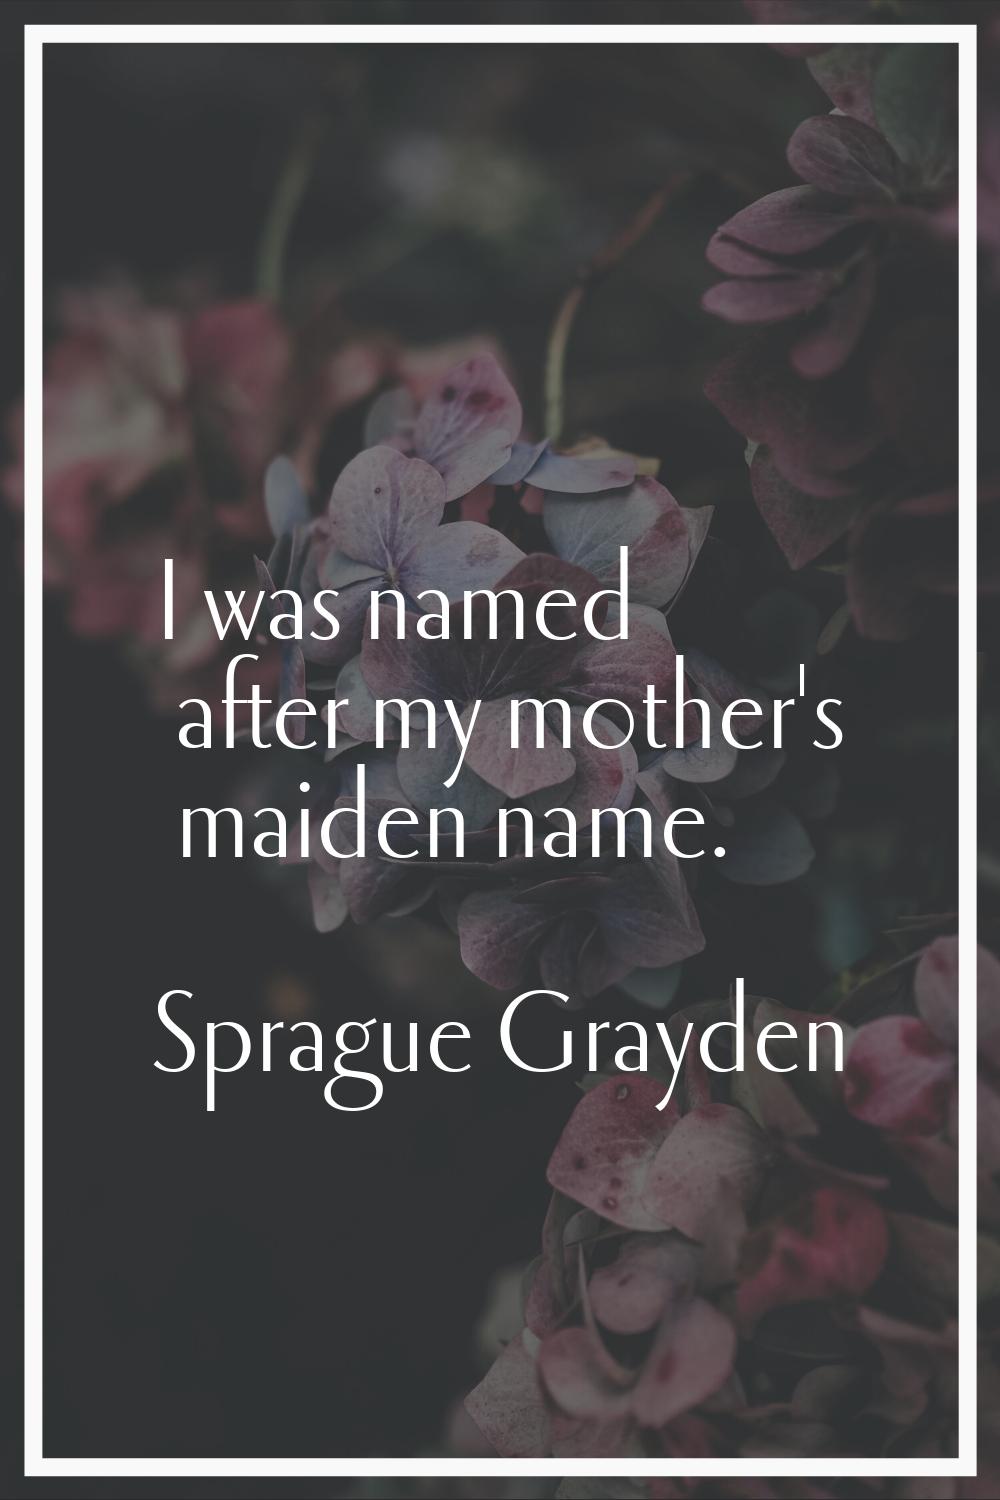 I was named after my mother's maiden name.